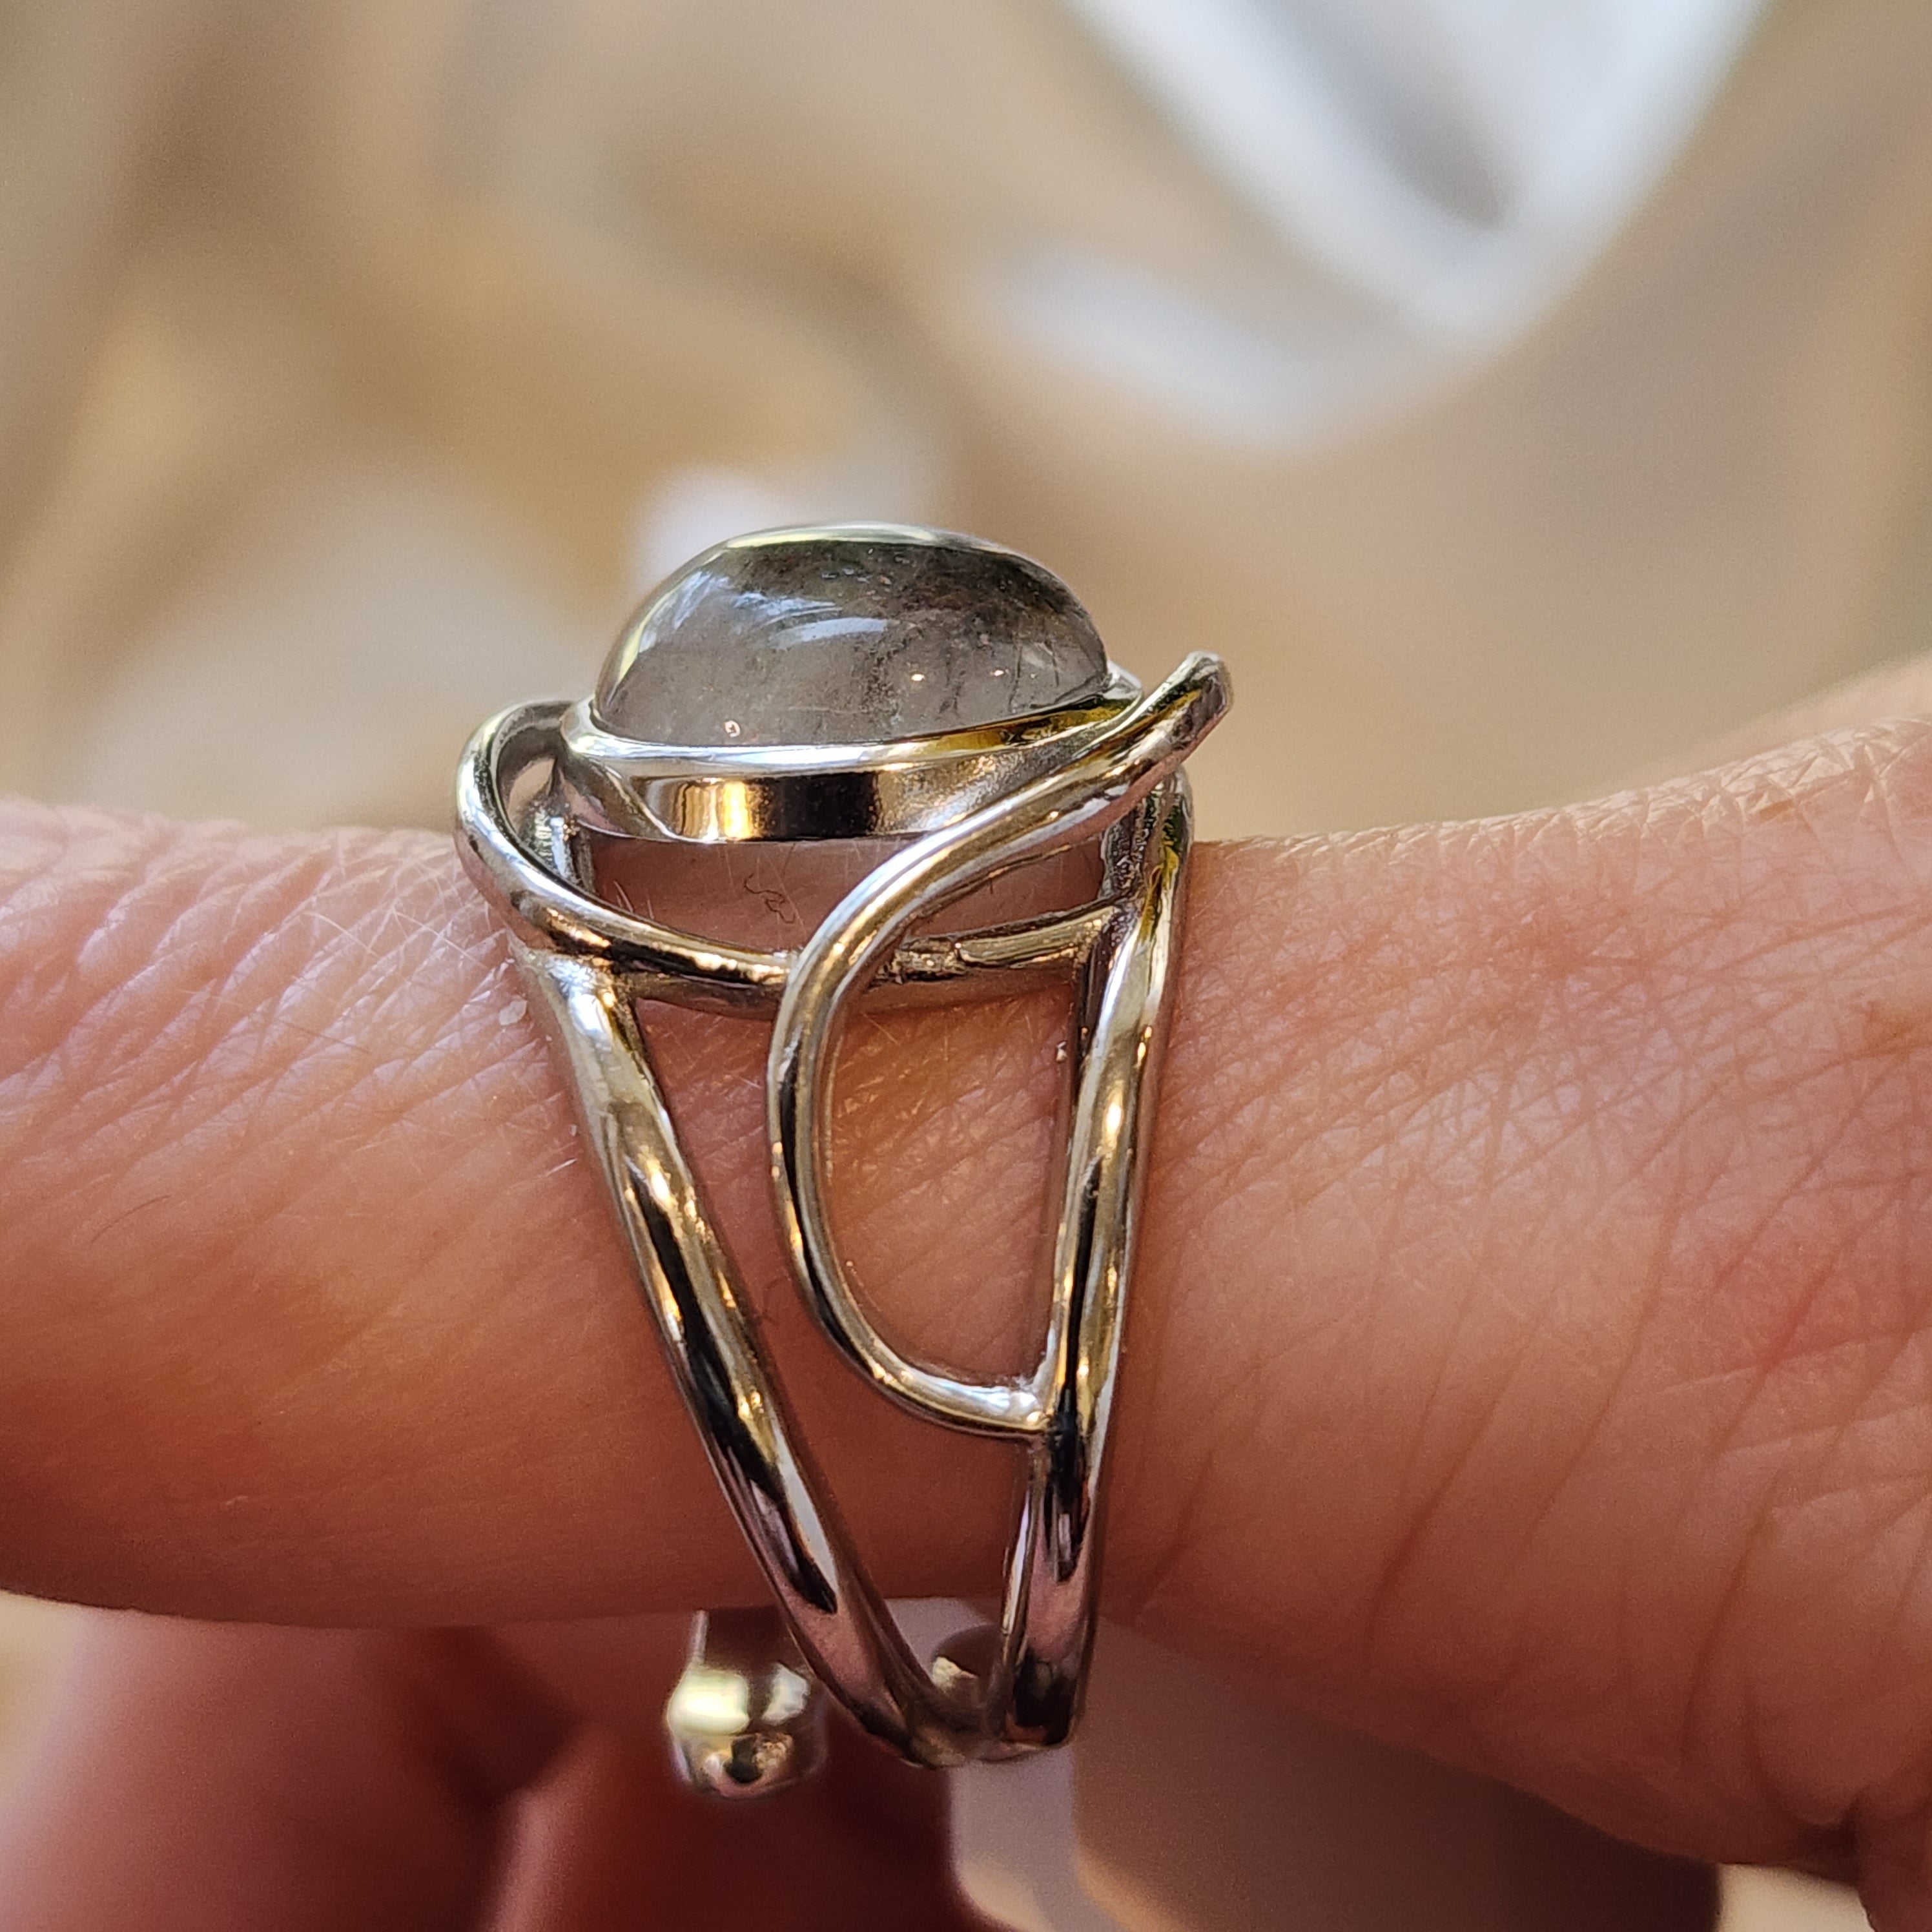 Hollandite in Quartz Finger Cuff Adjustable Ring .925 Silver for Finding your Destiny, Hope and Connecting with your Higher Self